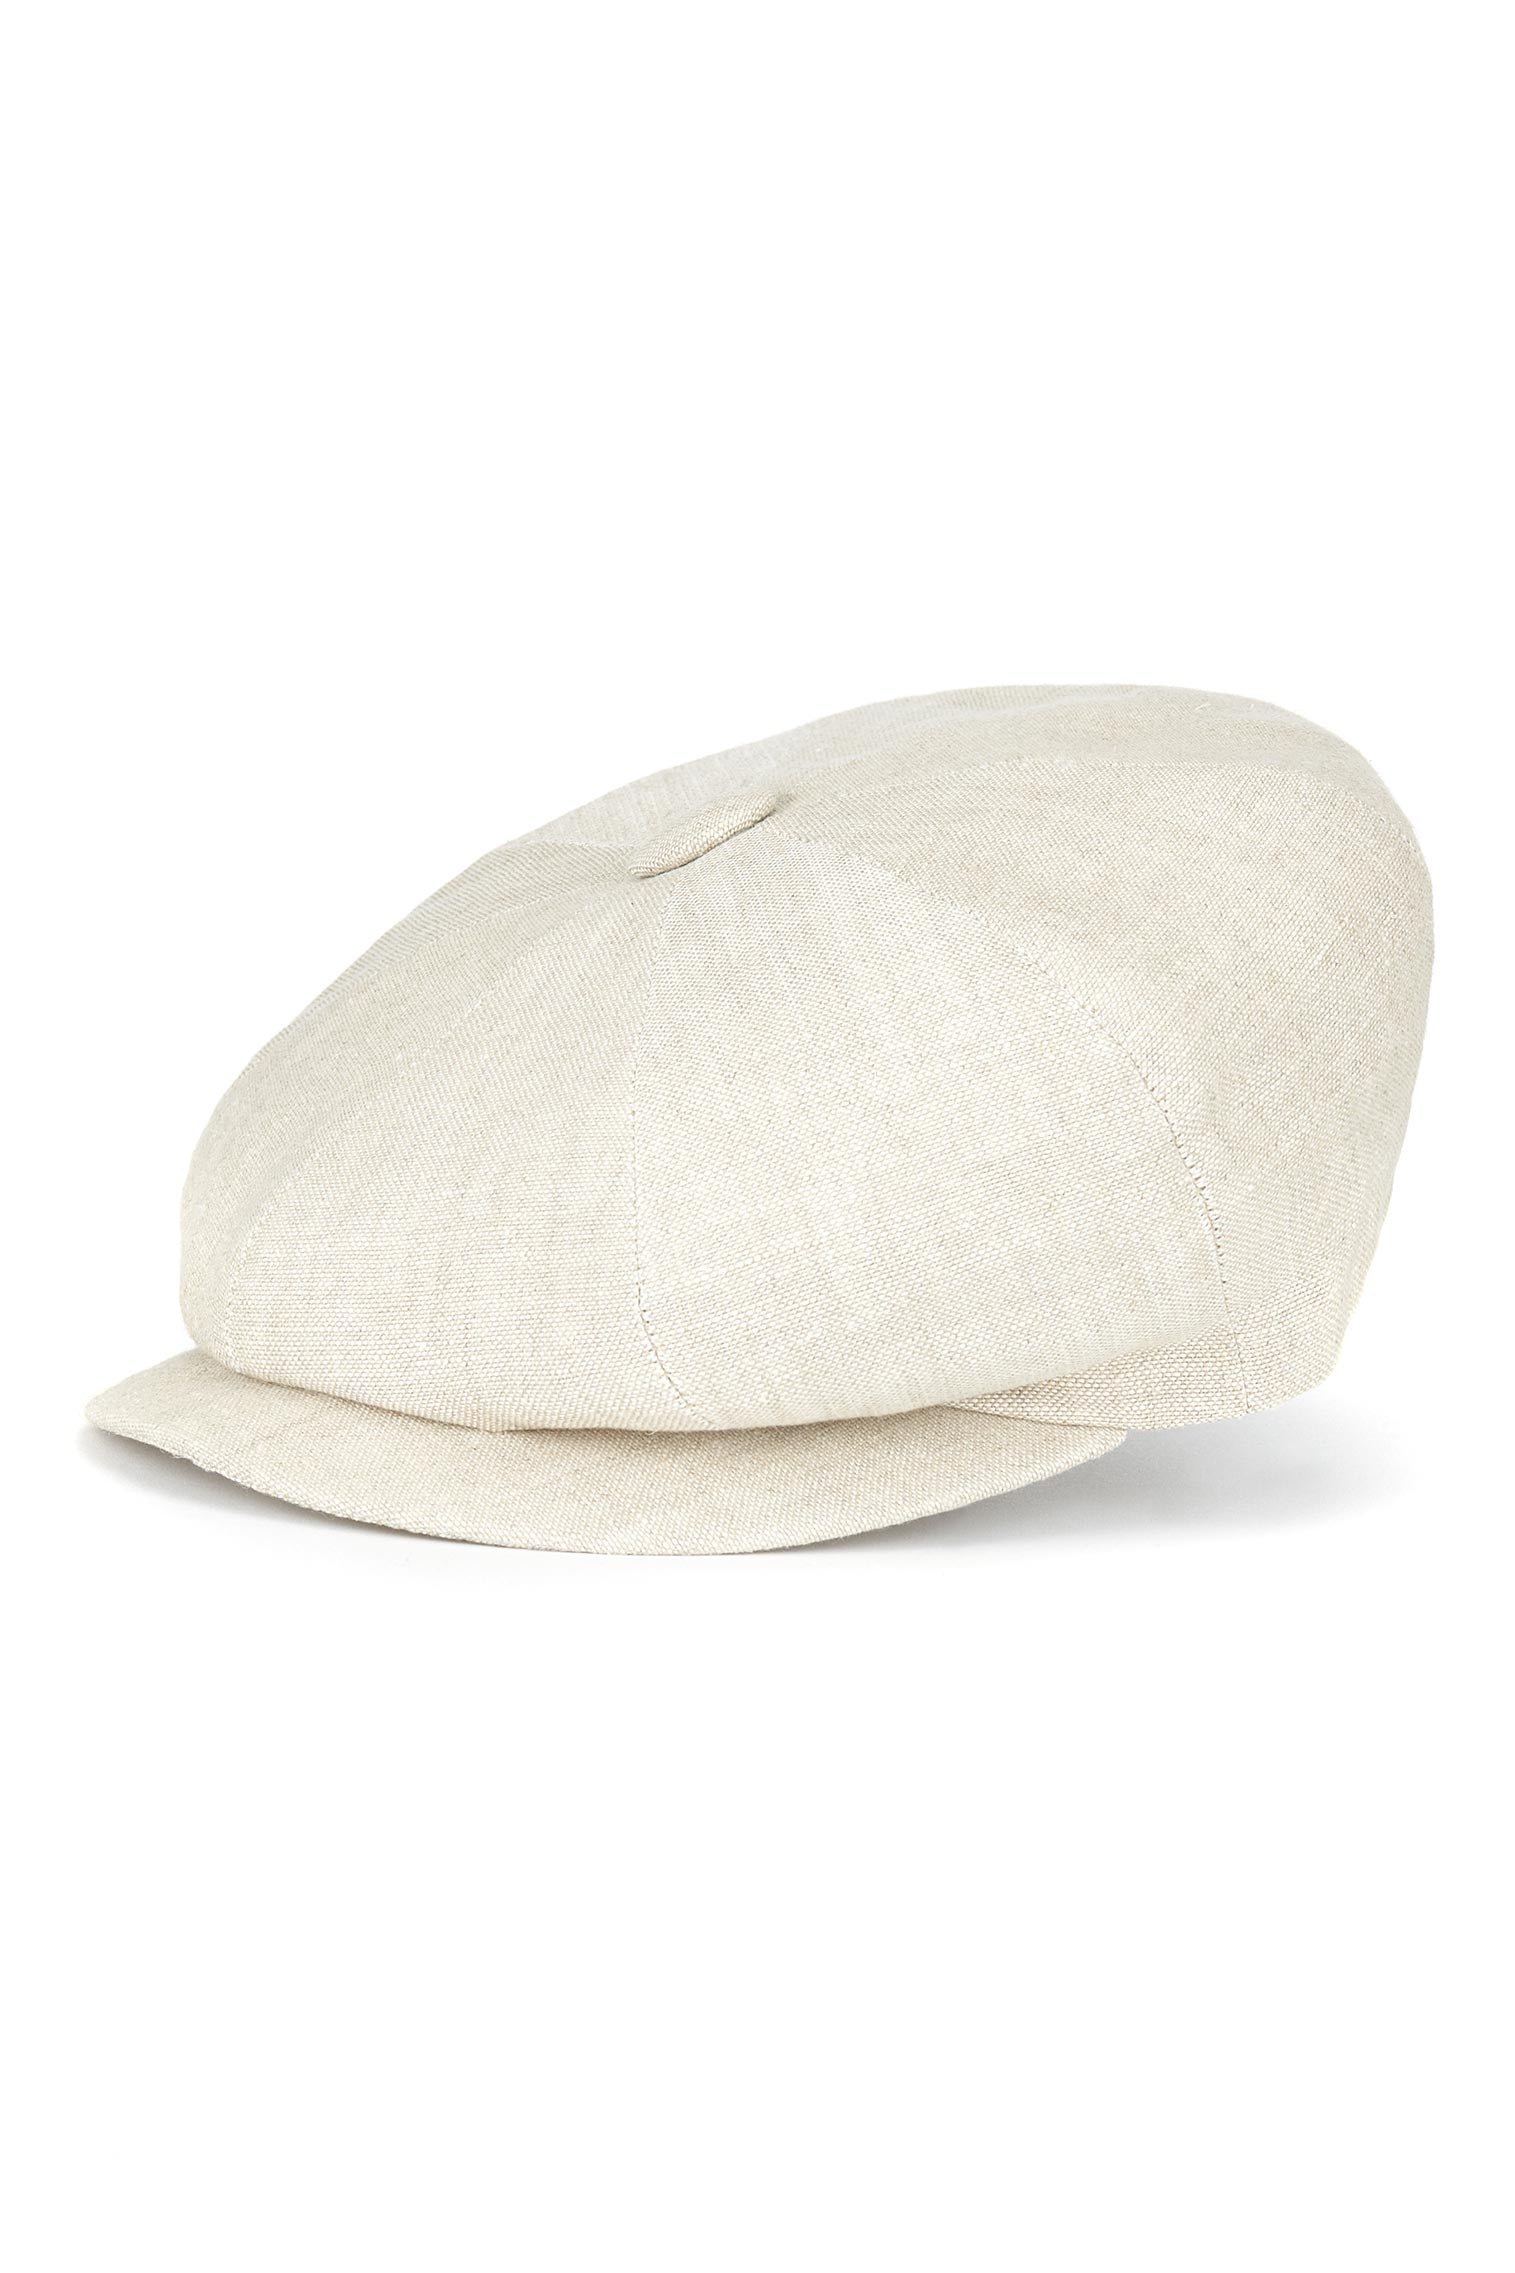 Linen Muirfield Bakerboy Cap - Hats for Round Face Shapes - Lock & Co. Hatters London UK